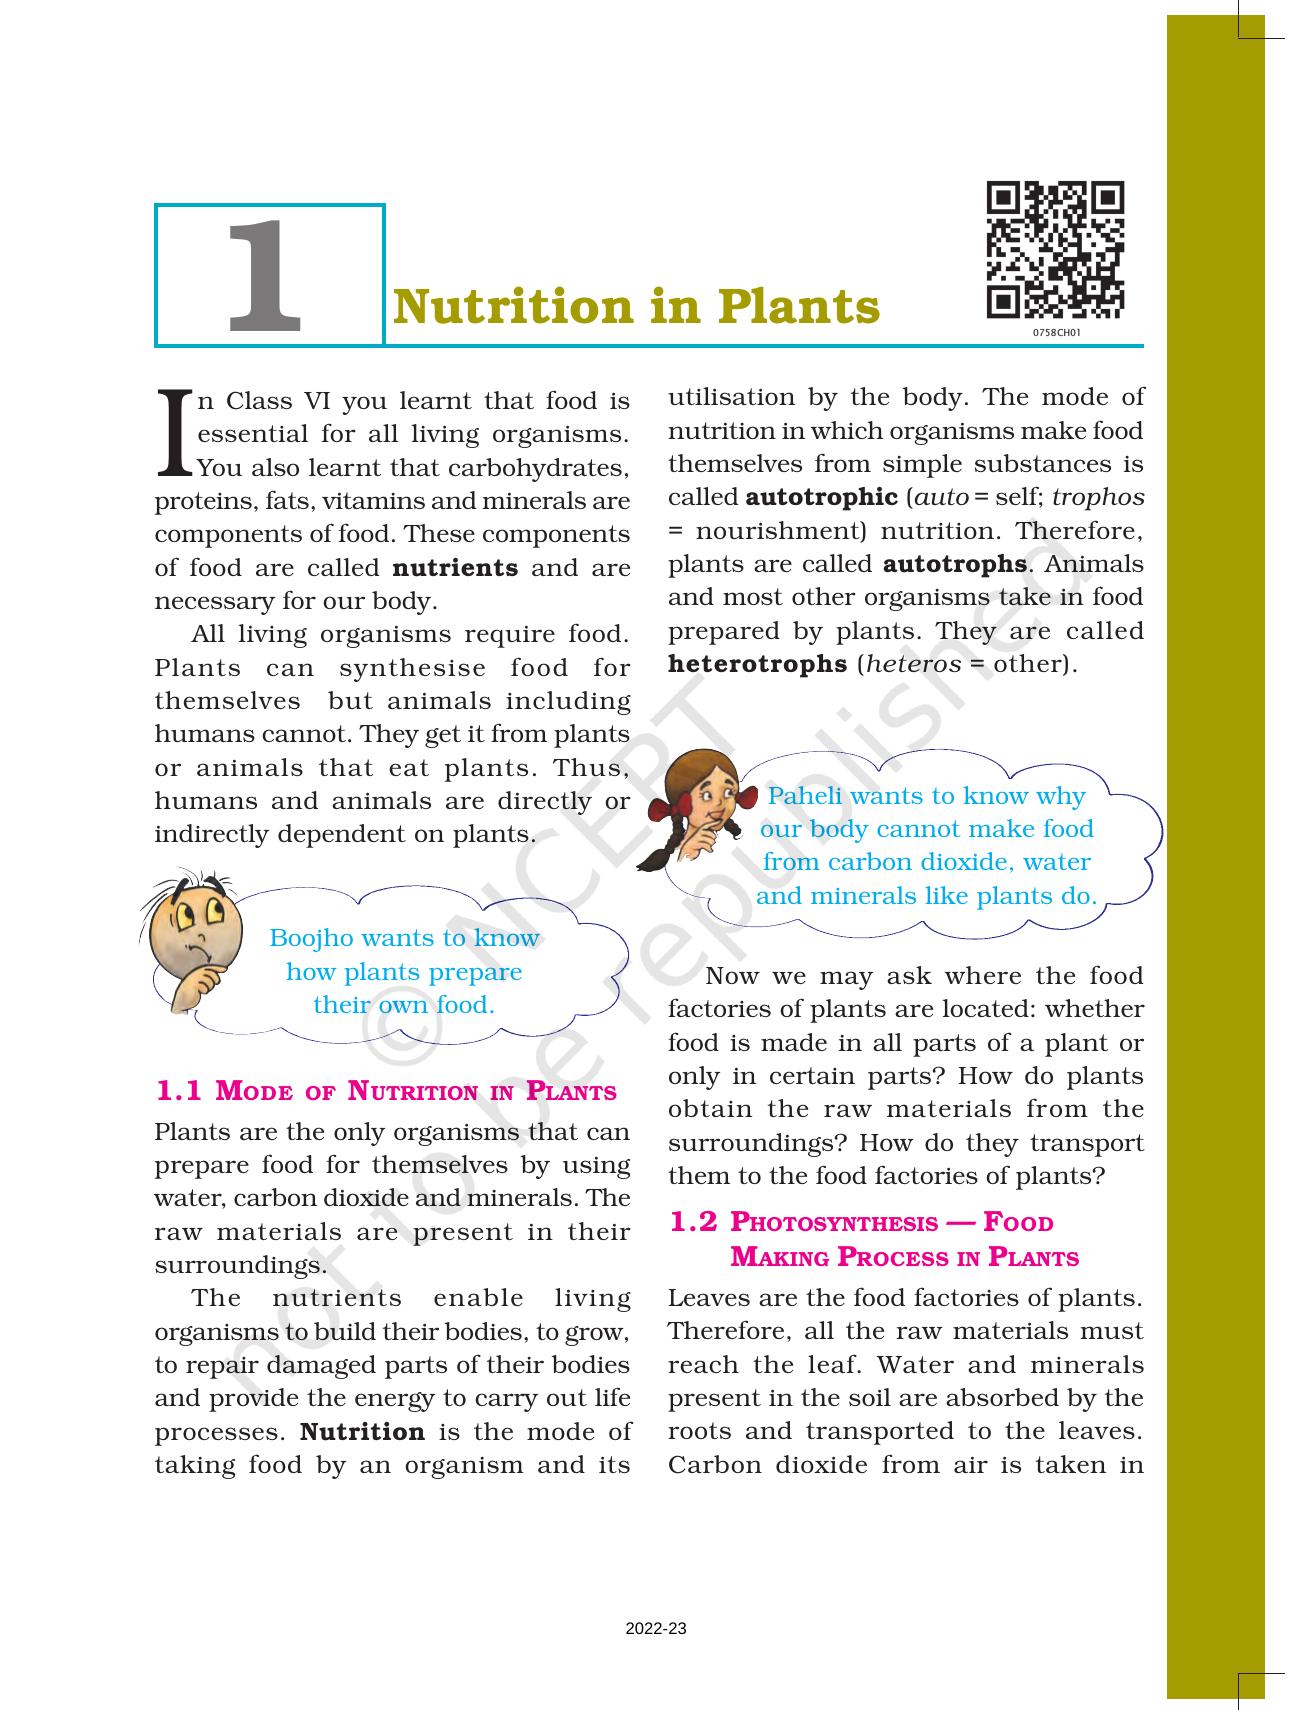 NCERT Book for Class 7 Science: Chapter 1-Nutrition in Plants - Page 1